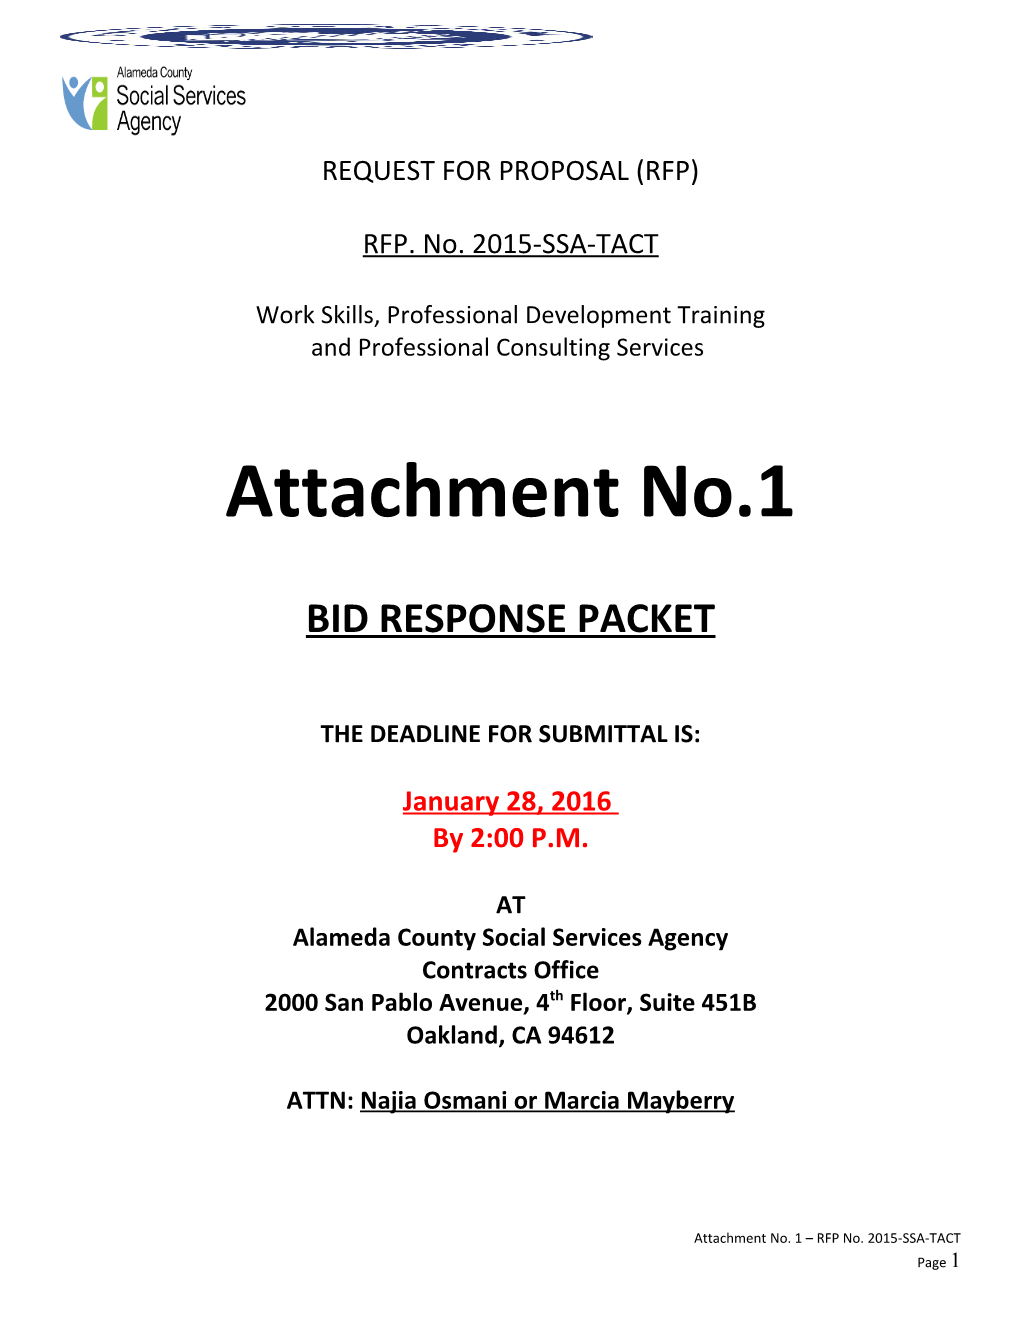 Request for Proposal (Rfp) s19